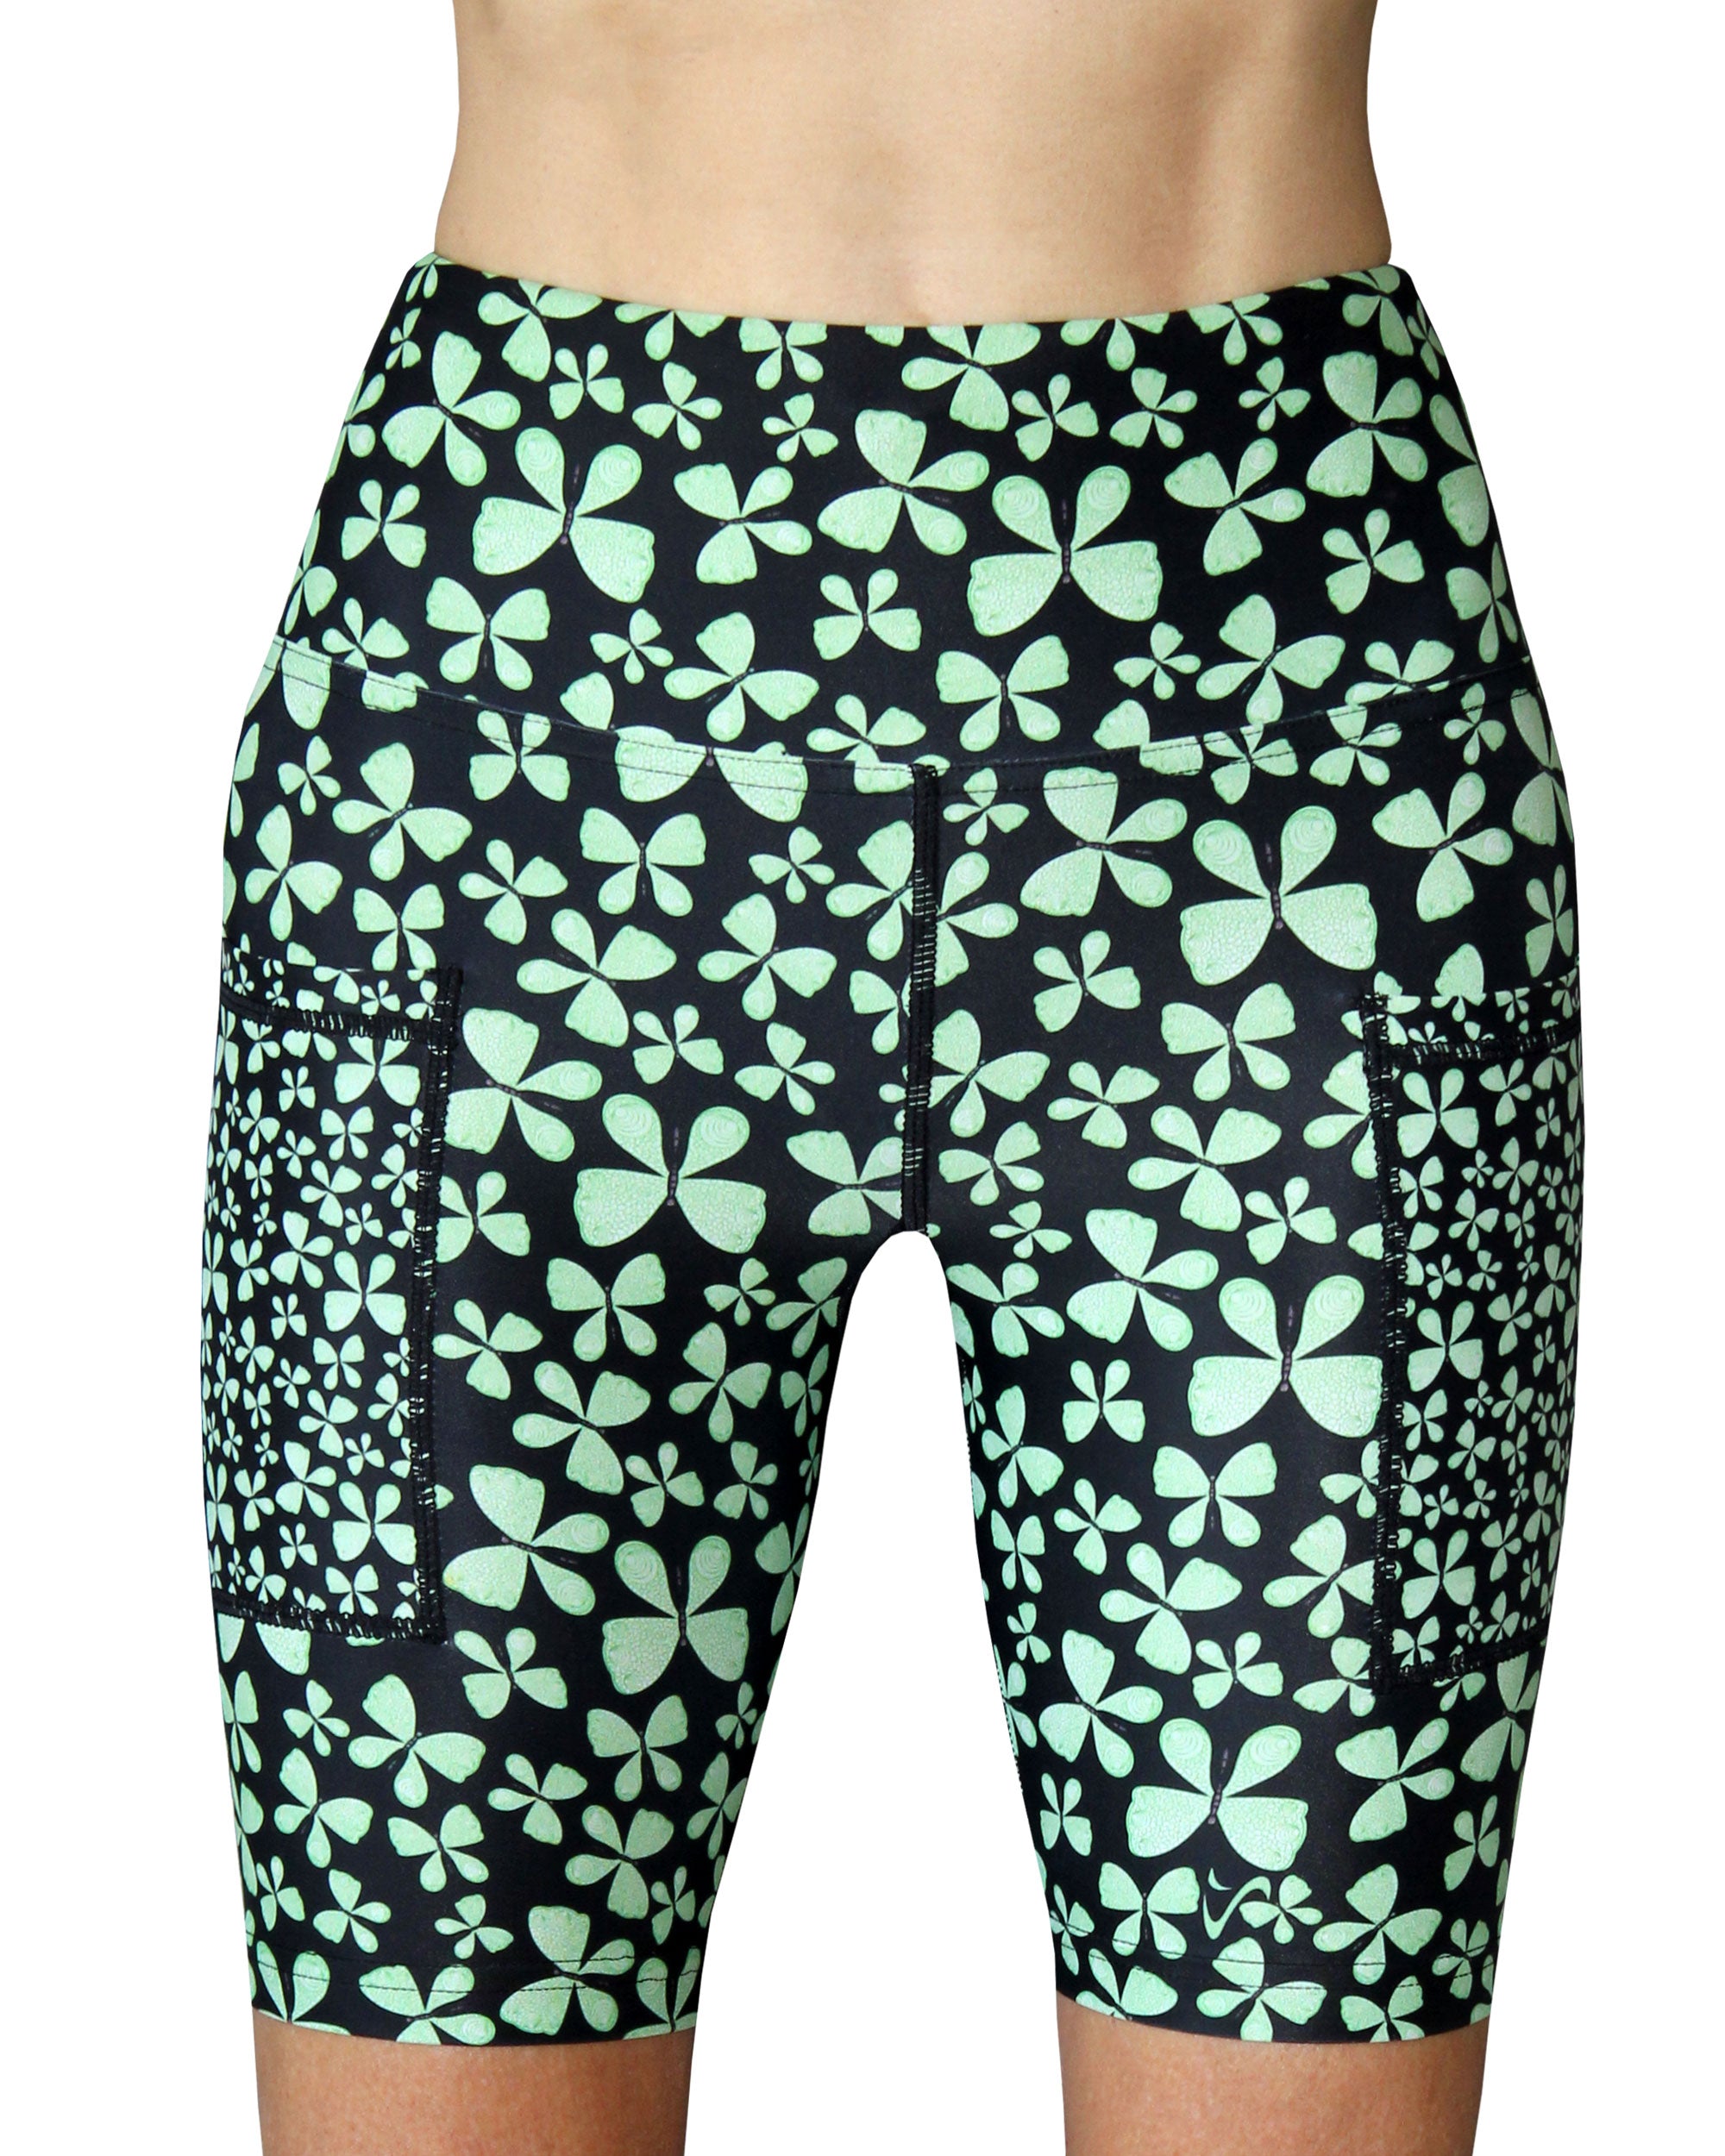 black and green funky pants  for women with butterflies .